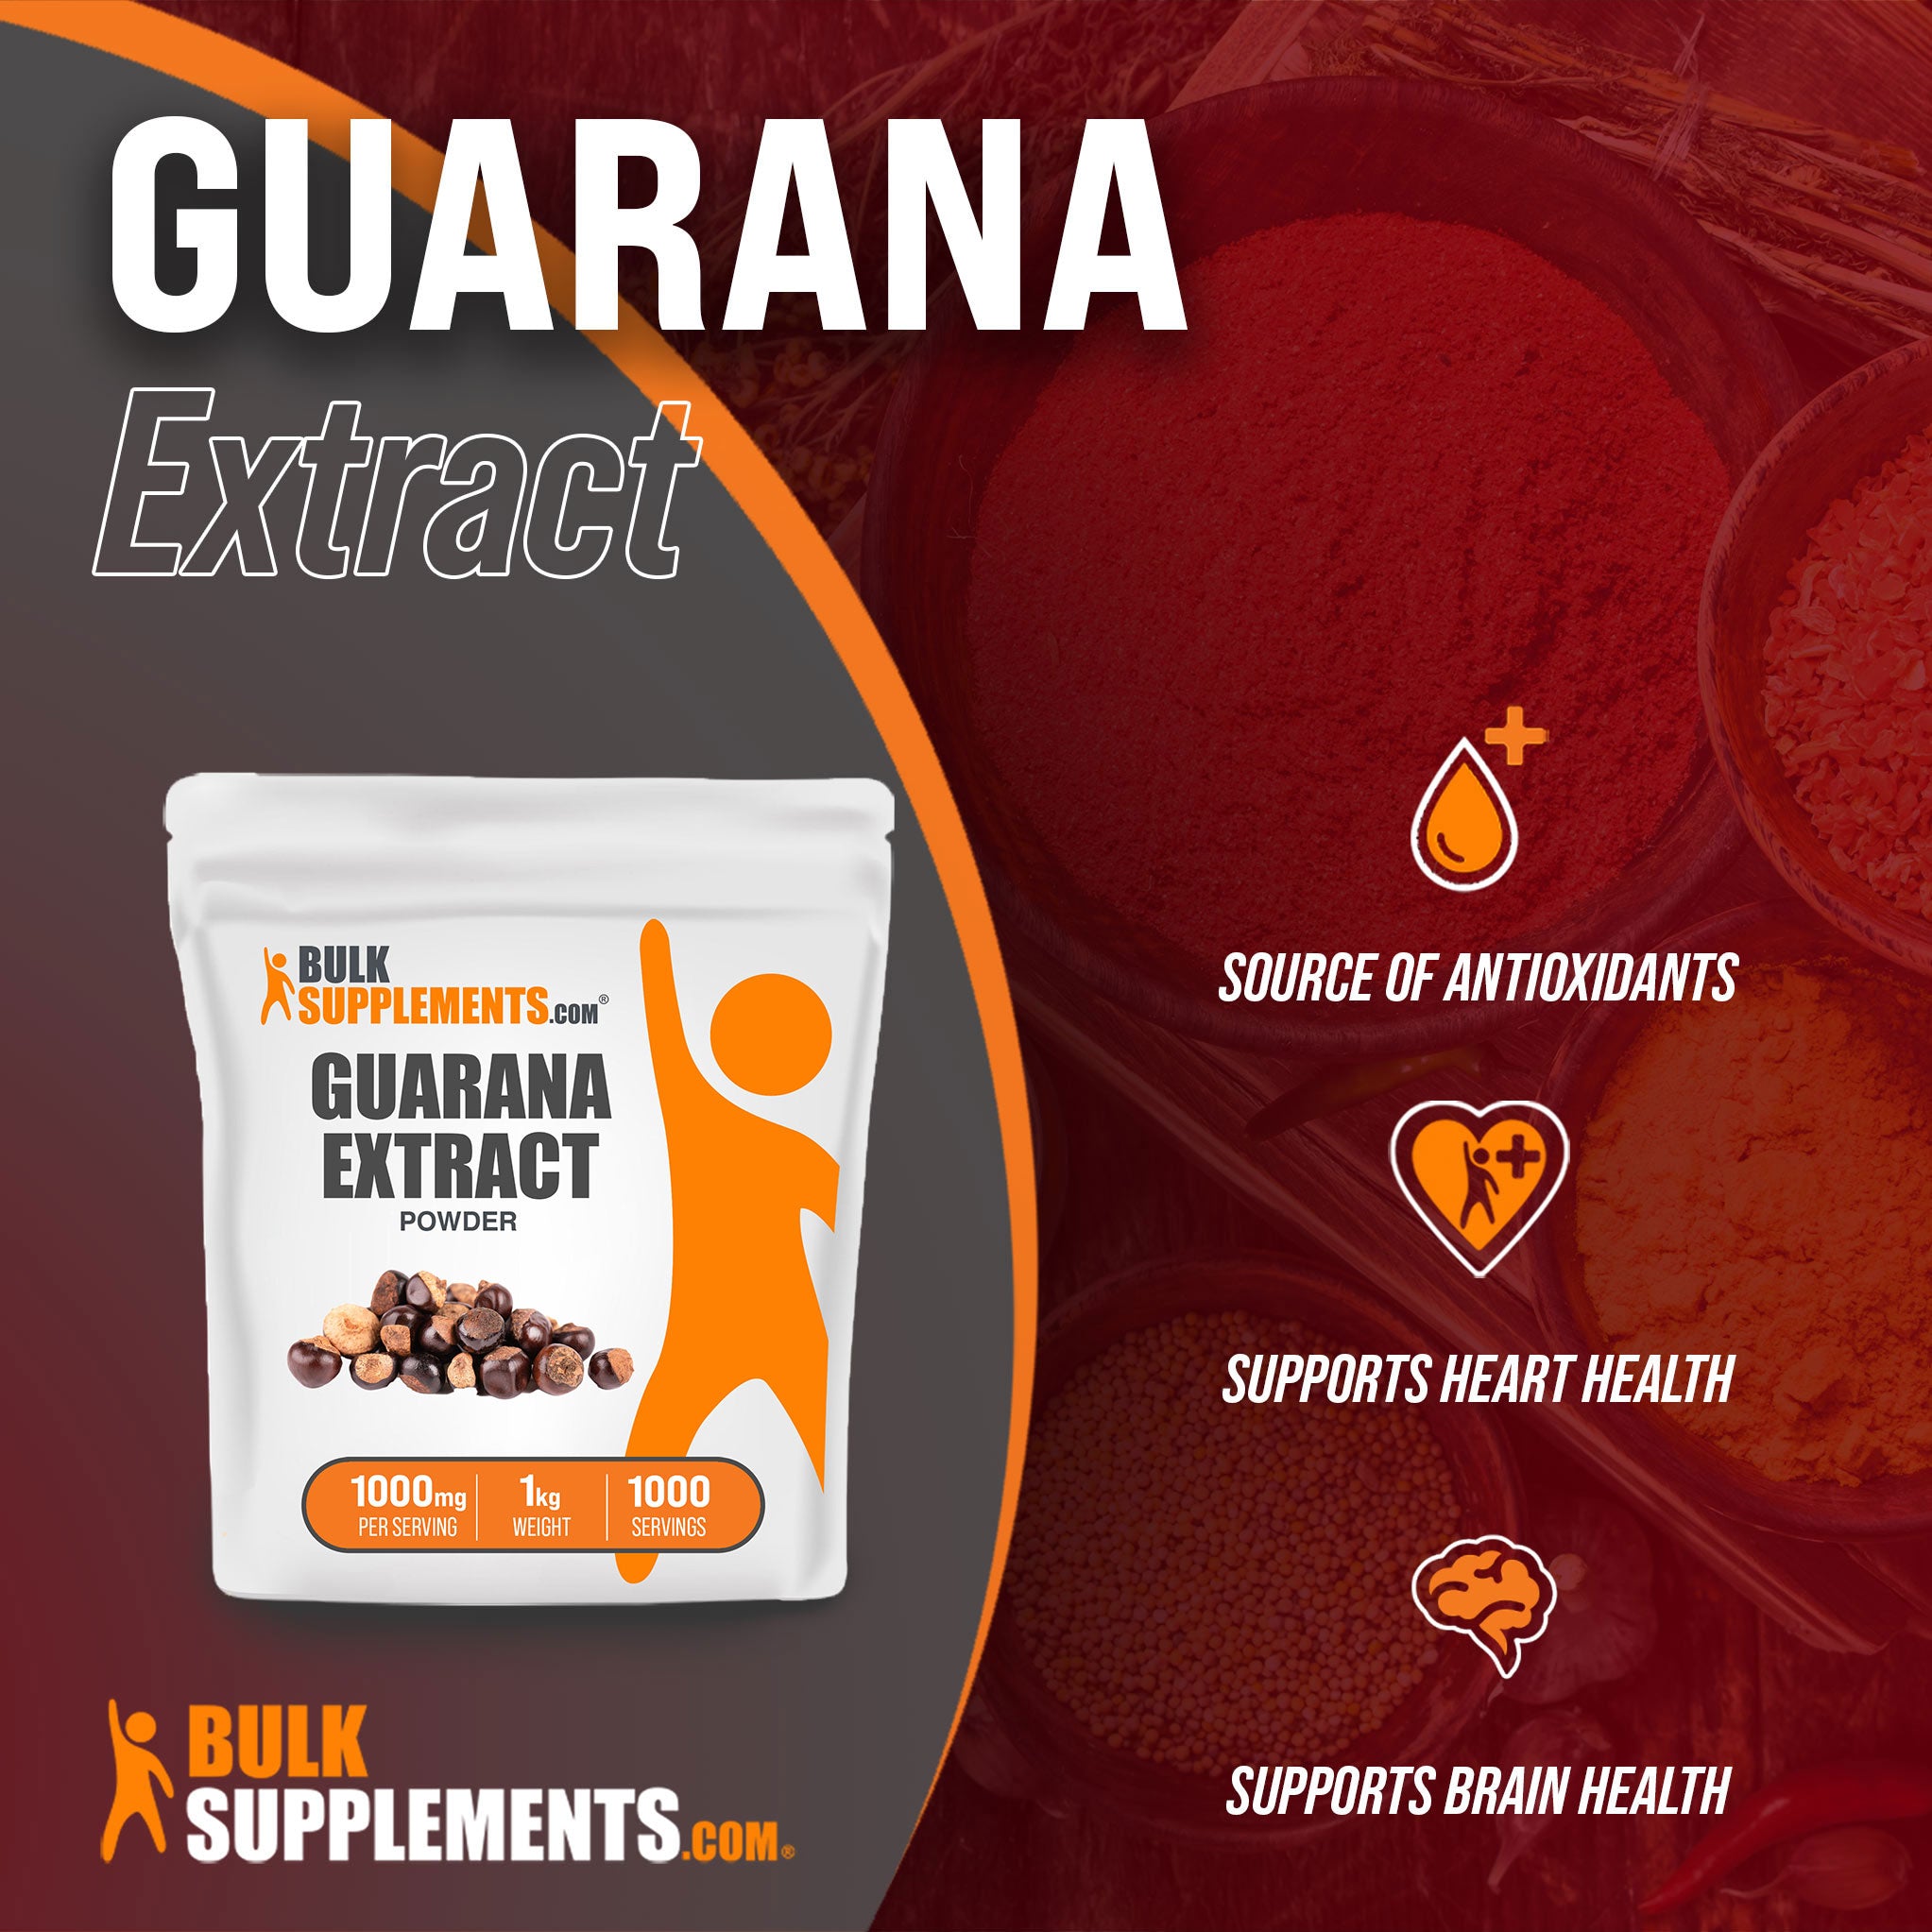 Benefits of Guarana Extract; source of antioxidants, supports heart health, supports brain health